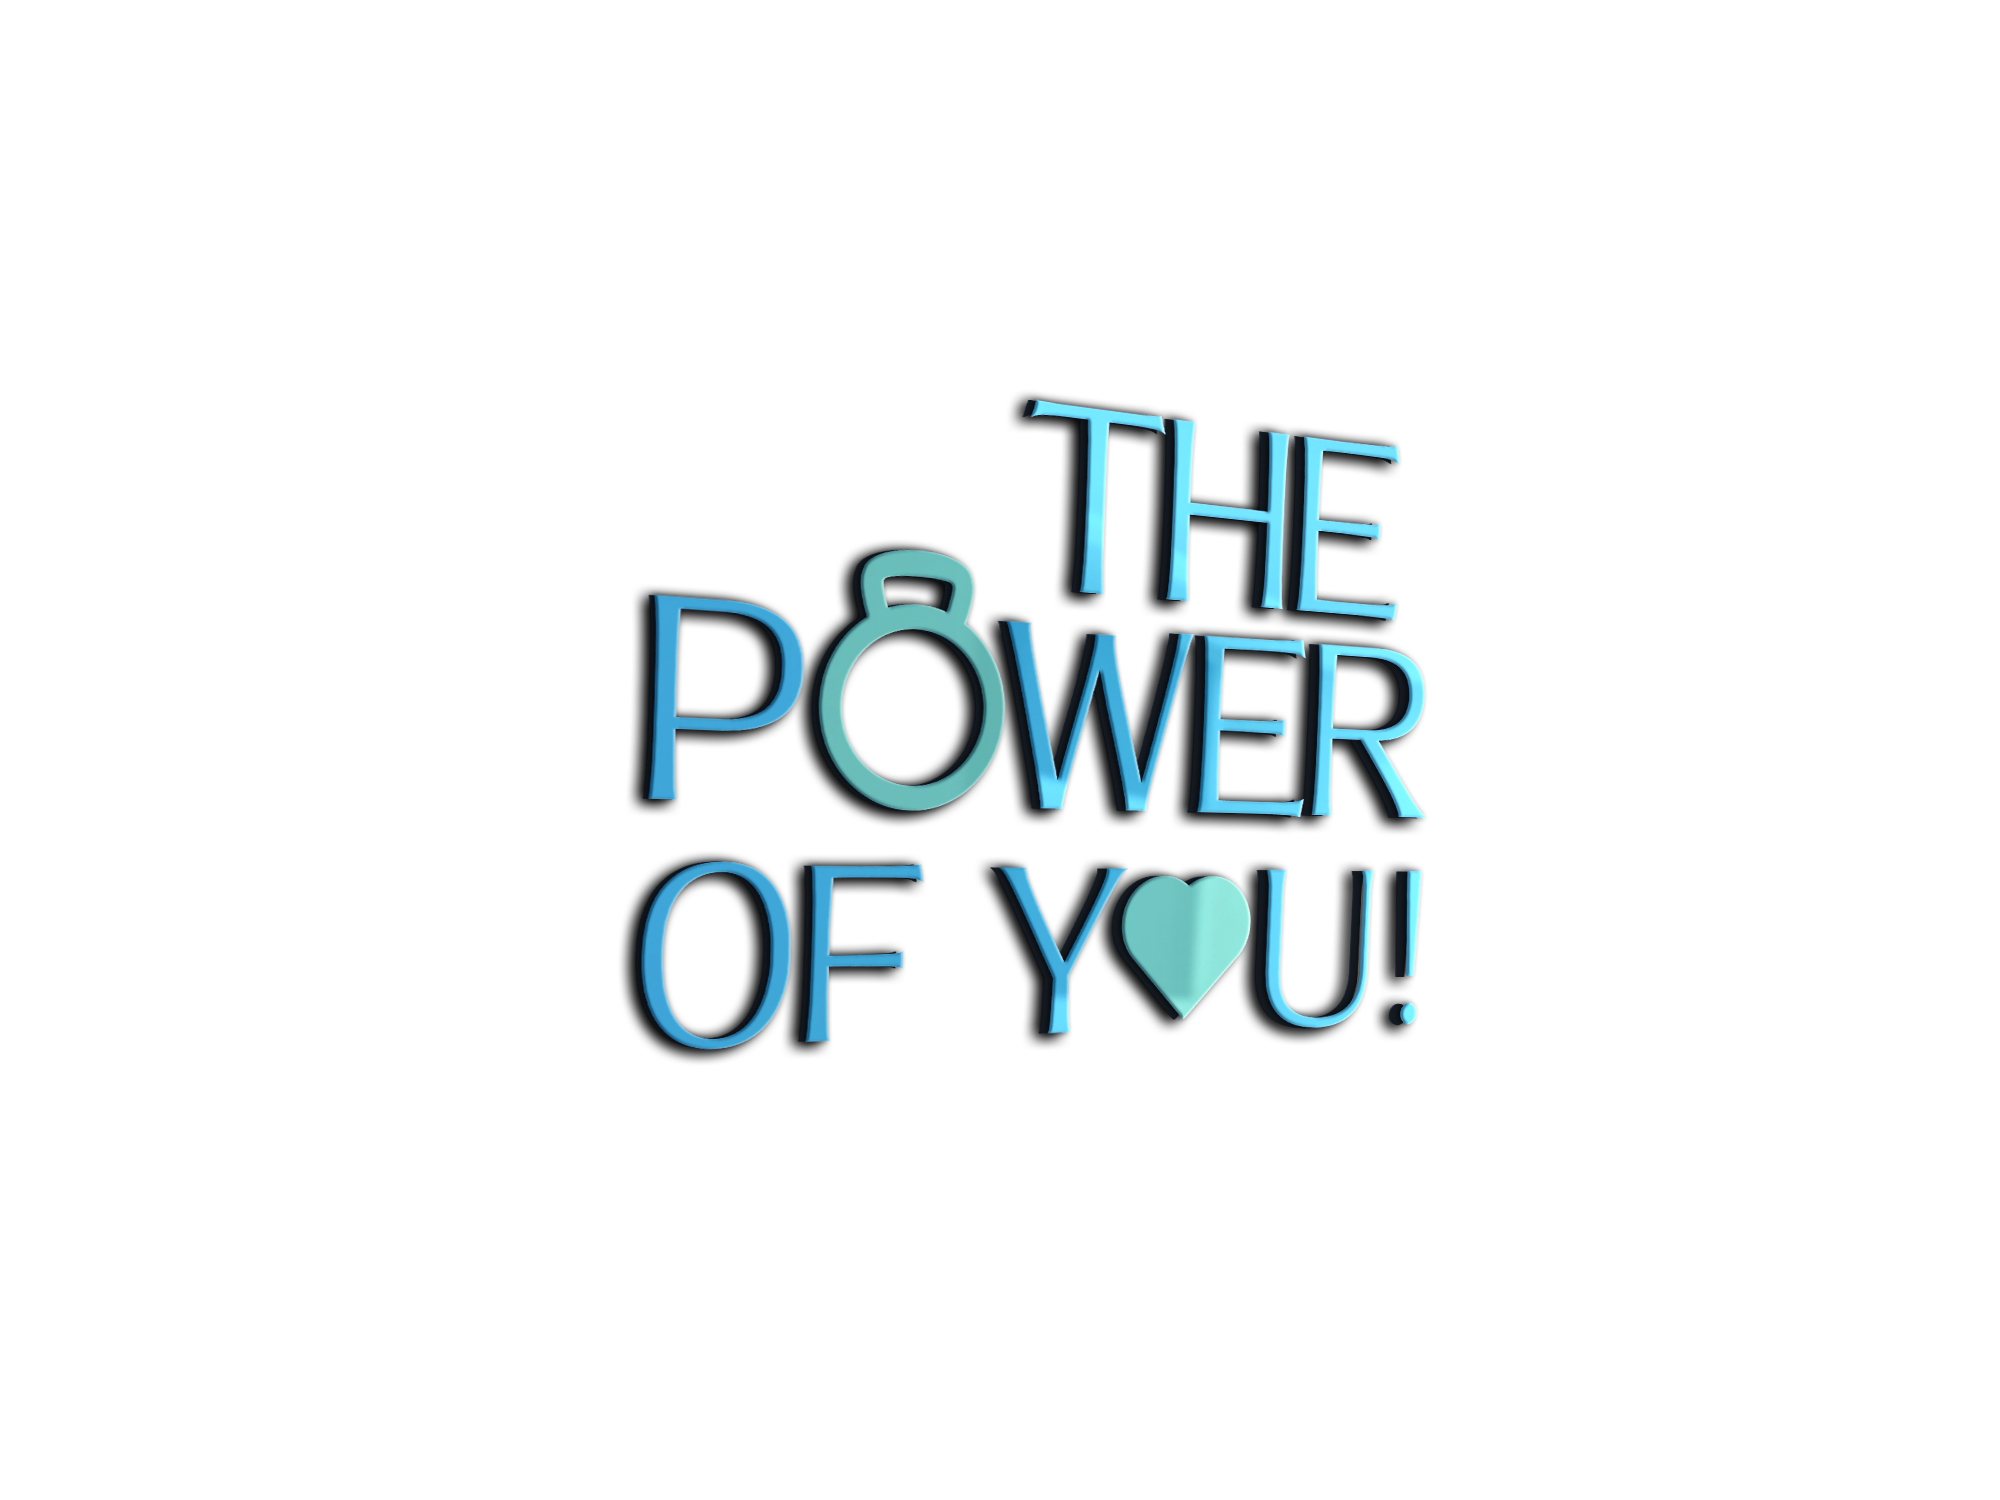 The Power Of You